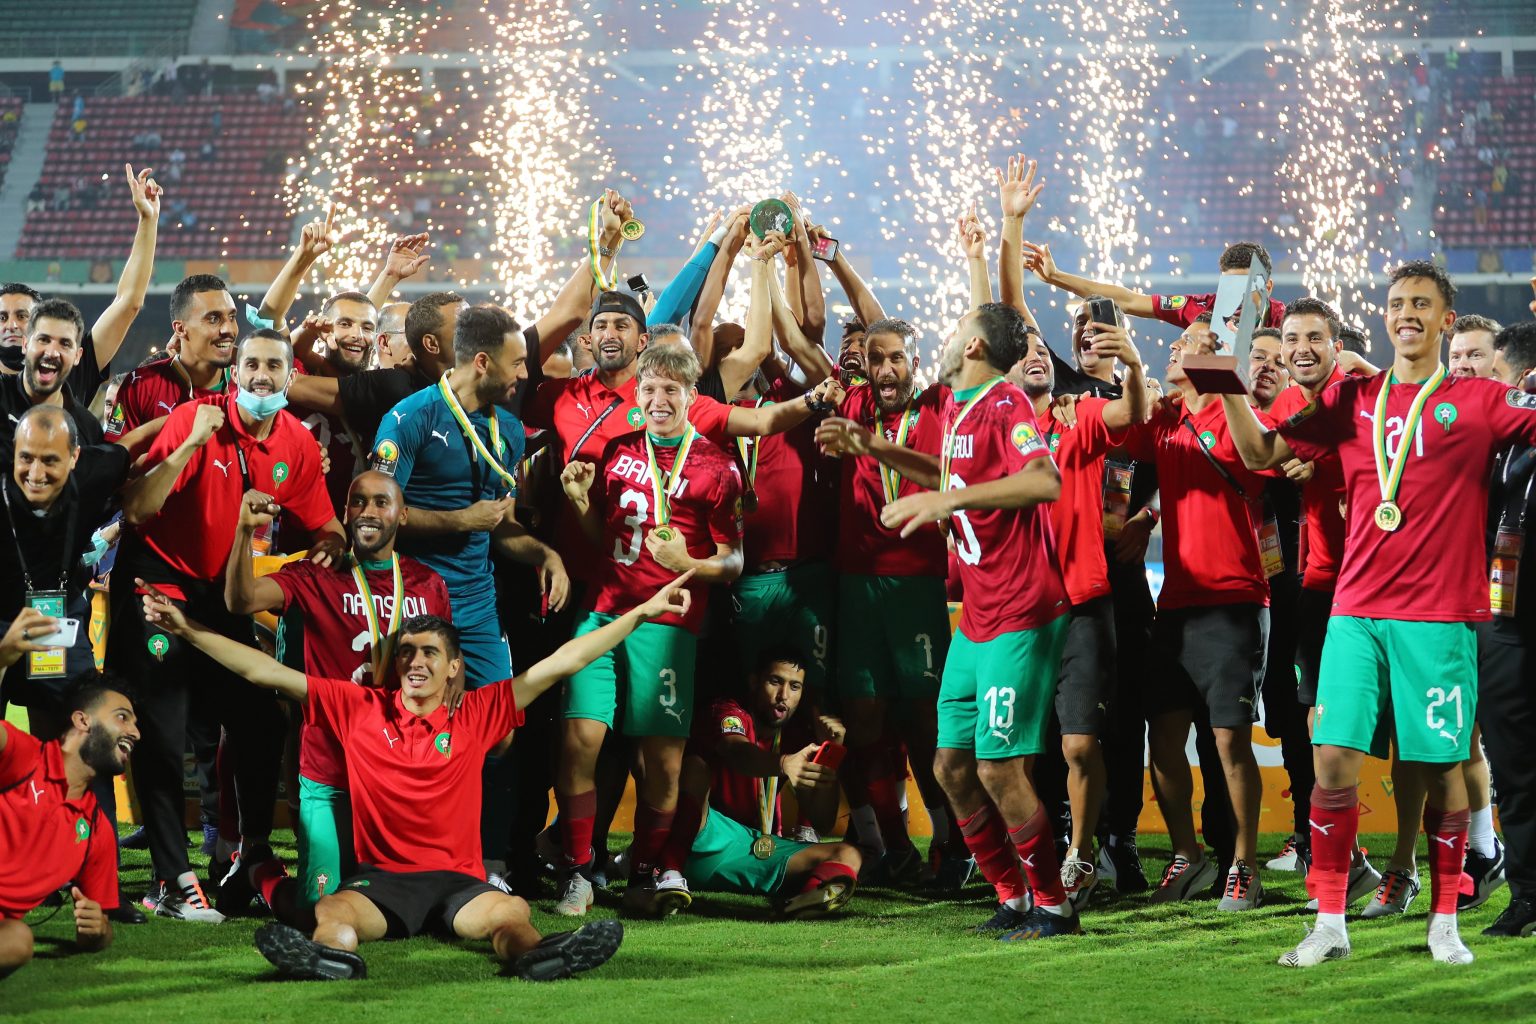 CHAN 2020 Morocco rules Africa after beating Mali to make history